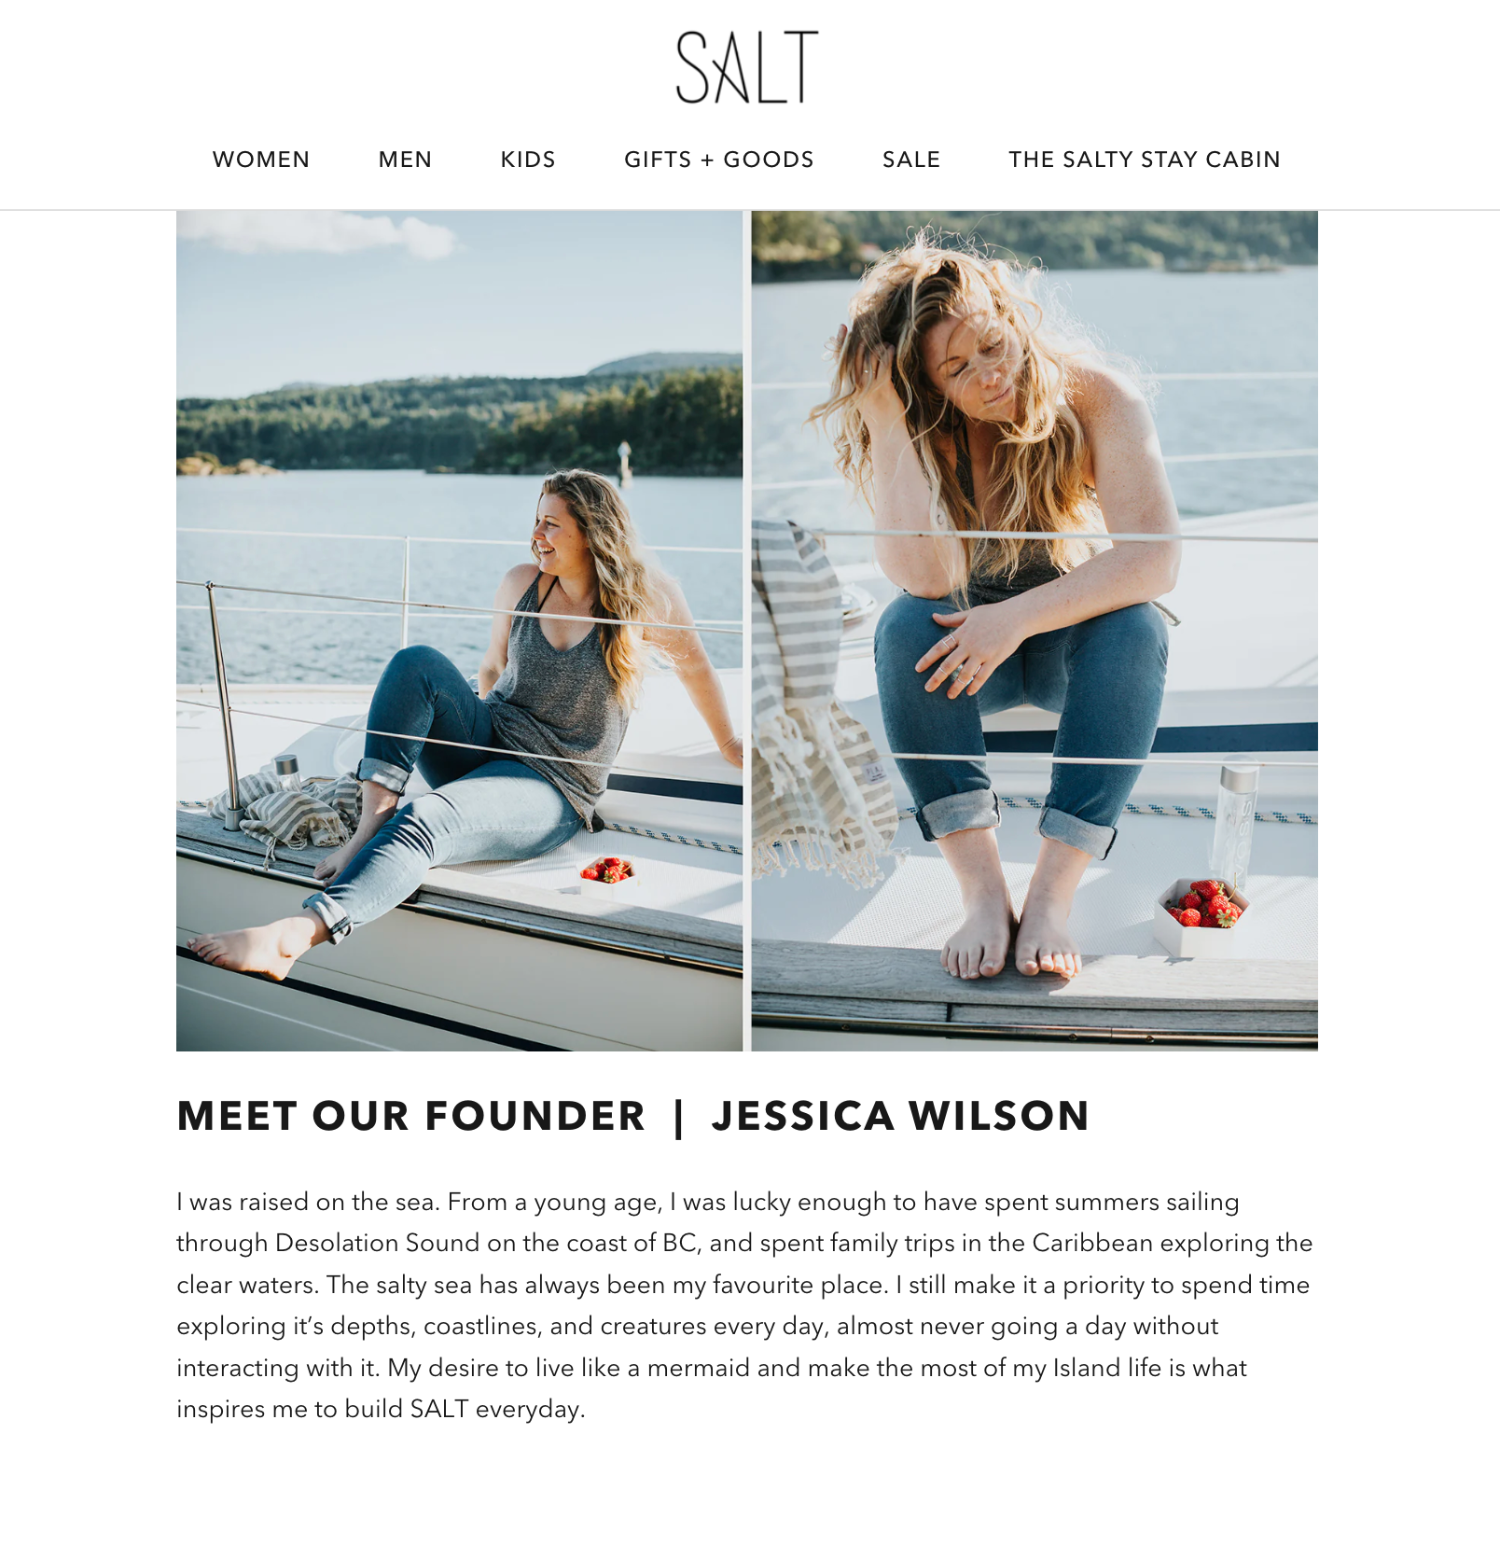 An ecommerce page from the brand SALT's website